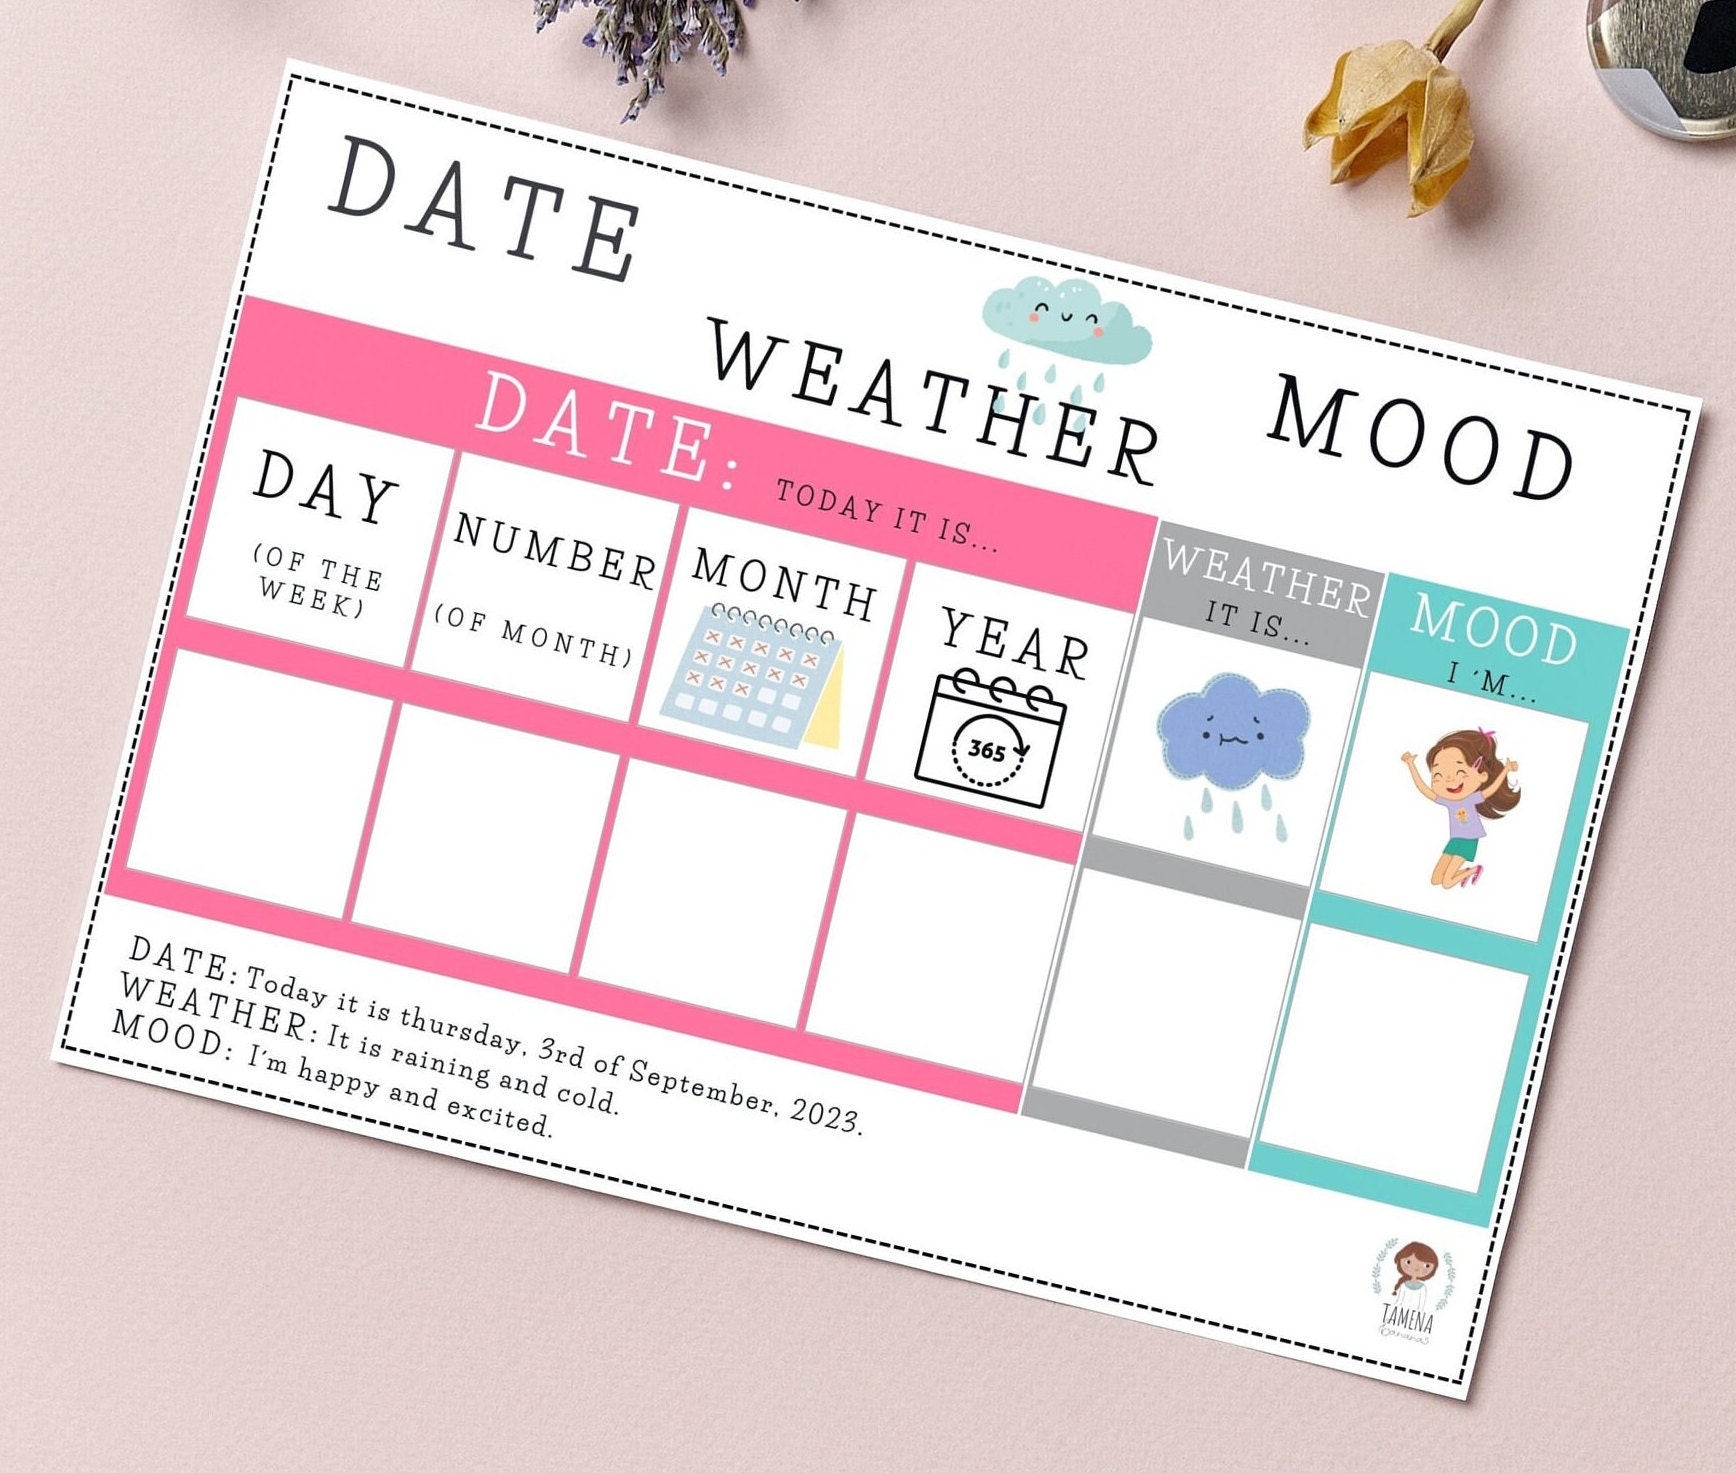 Calendar Months and Icons Stickers Sheet – Country Croppers